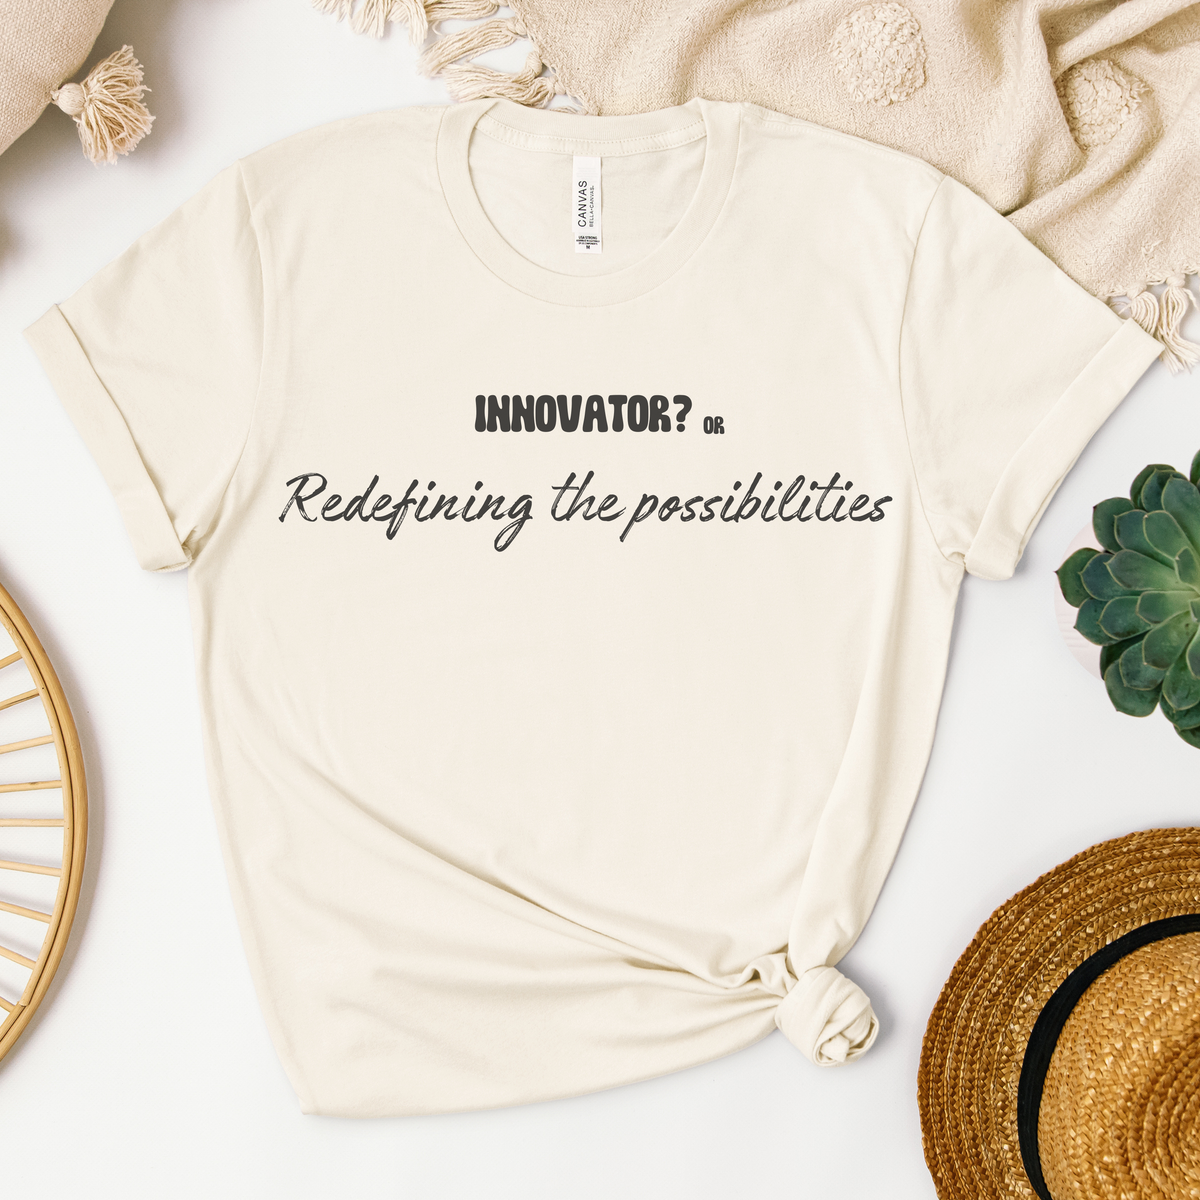 Innovator? or Redefining the possibilities T-shirt.